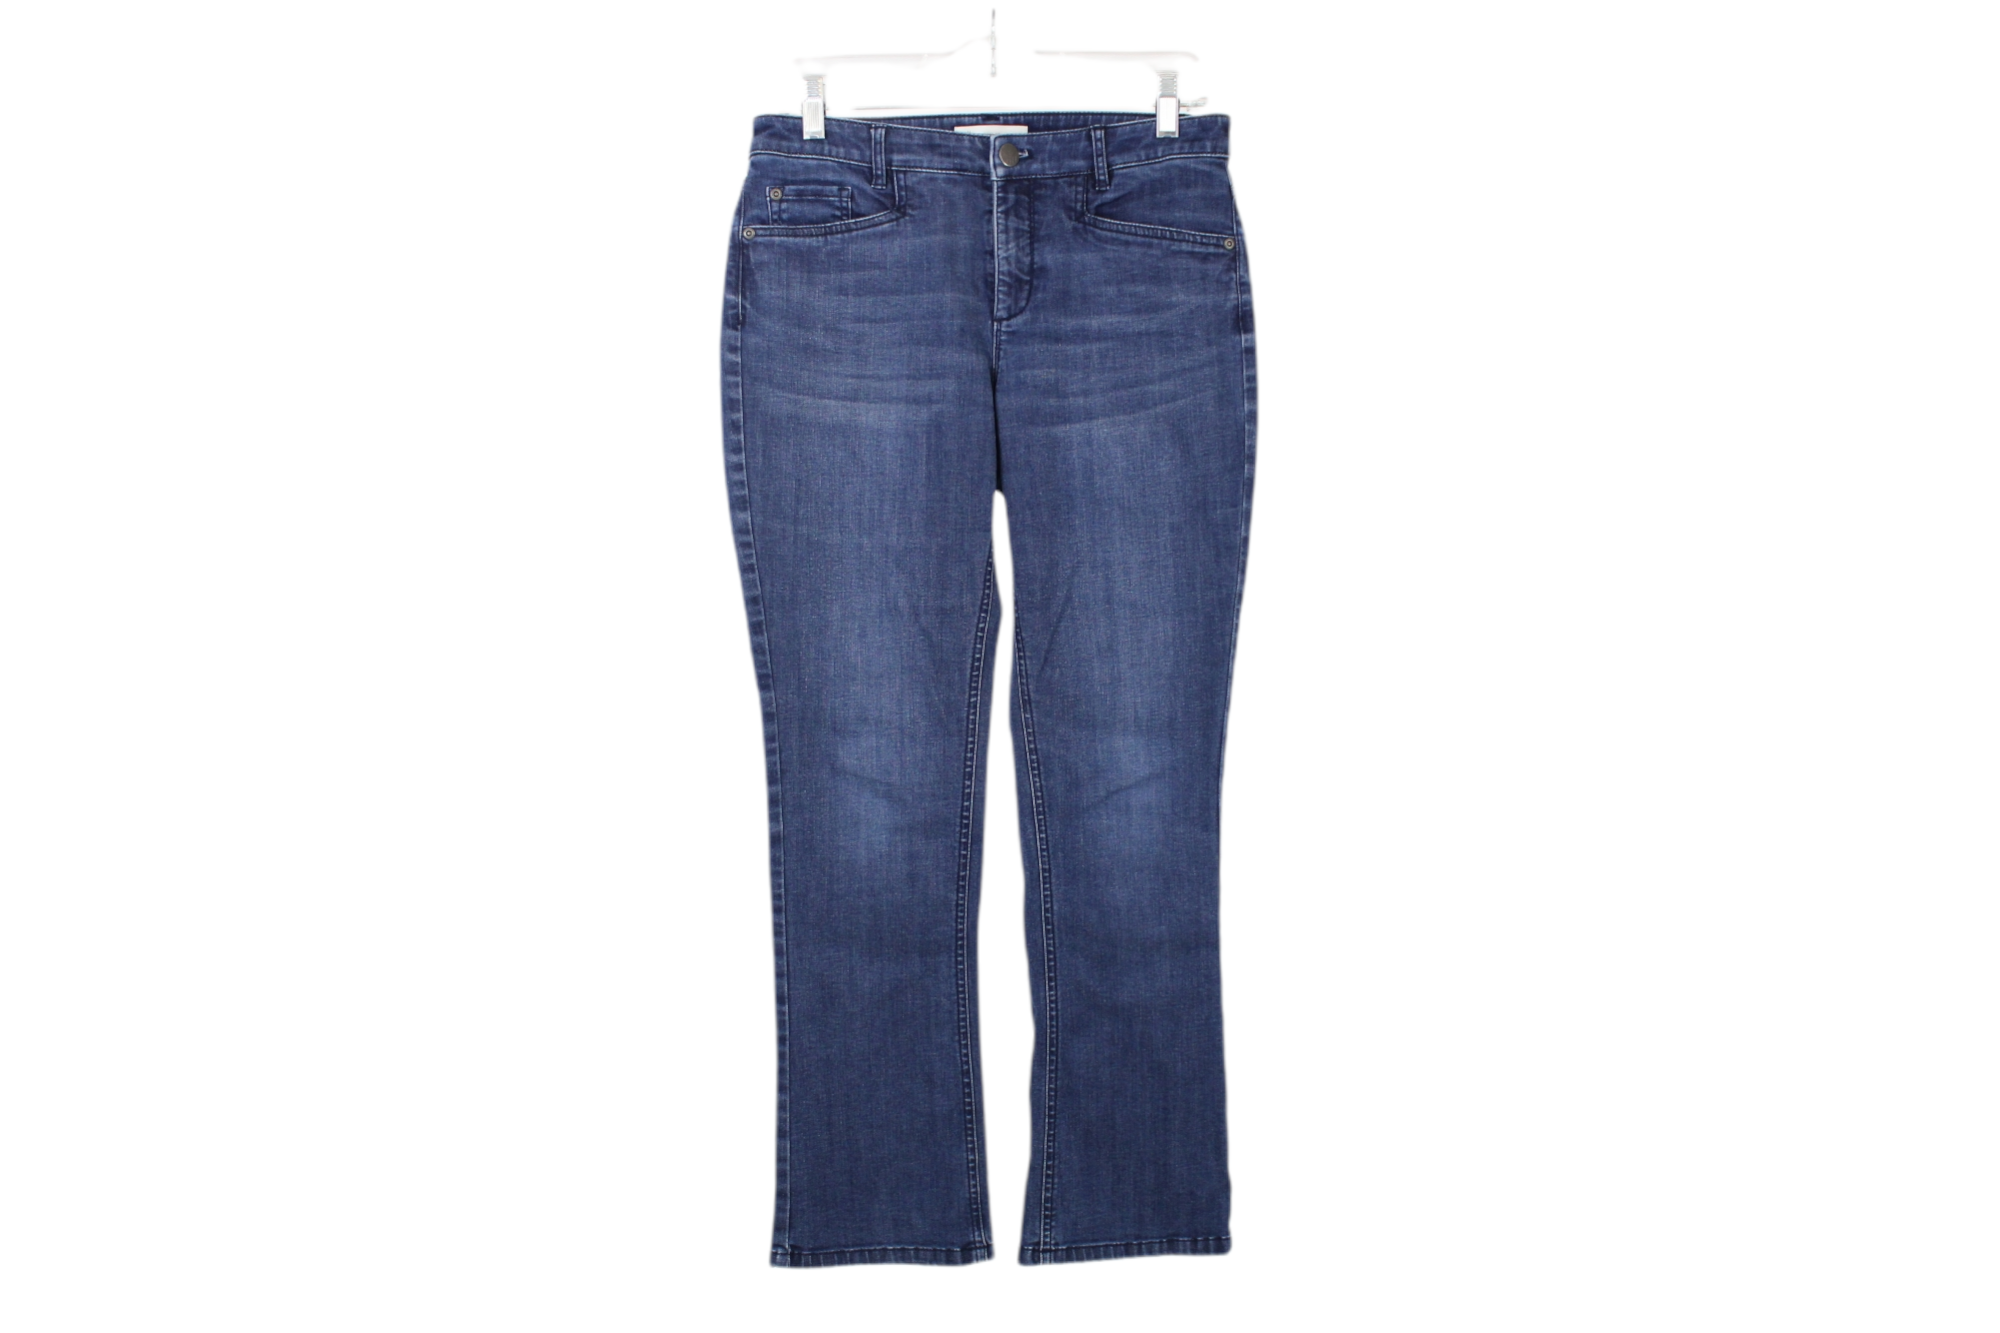 J. Jill Smooth Fit Barely Bootcut Denim Jeans | 6 Petite